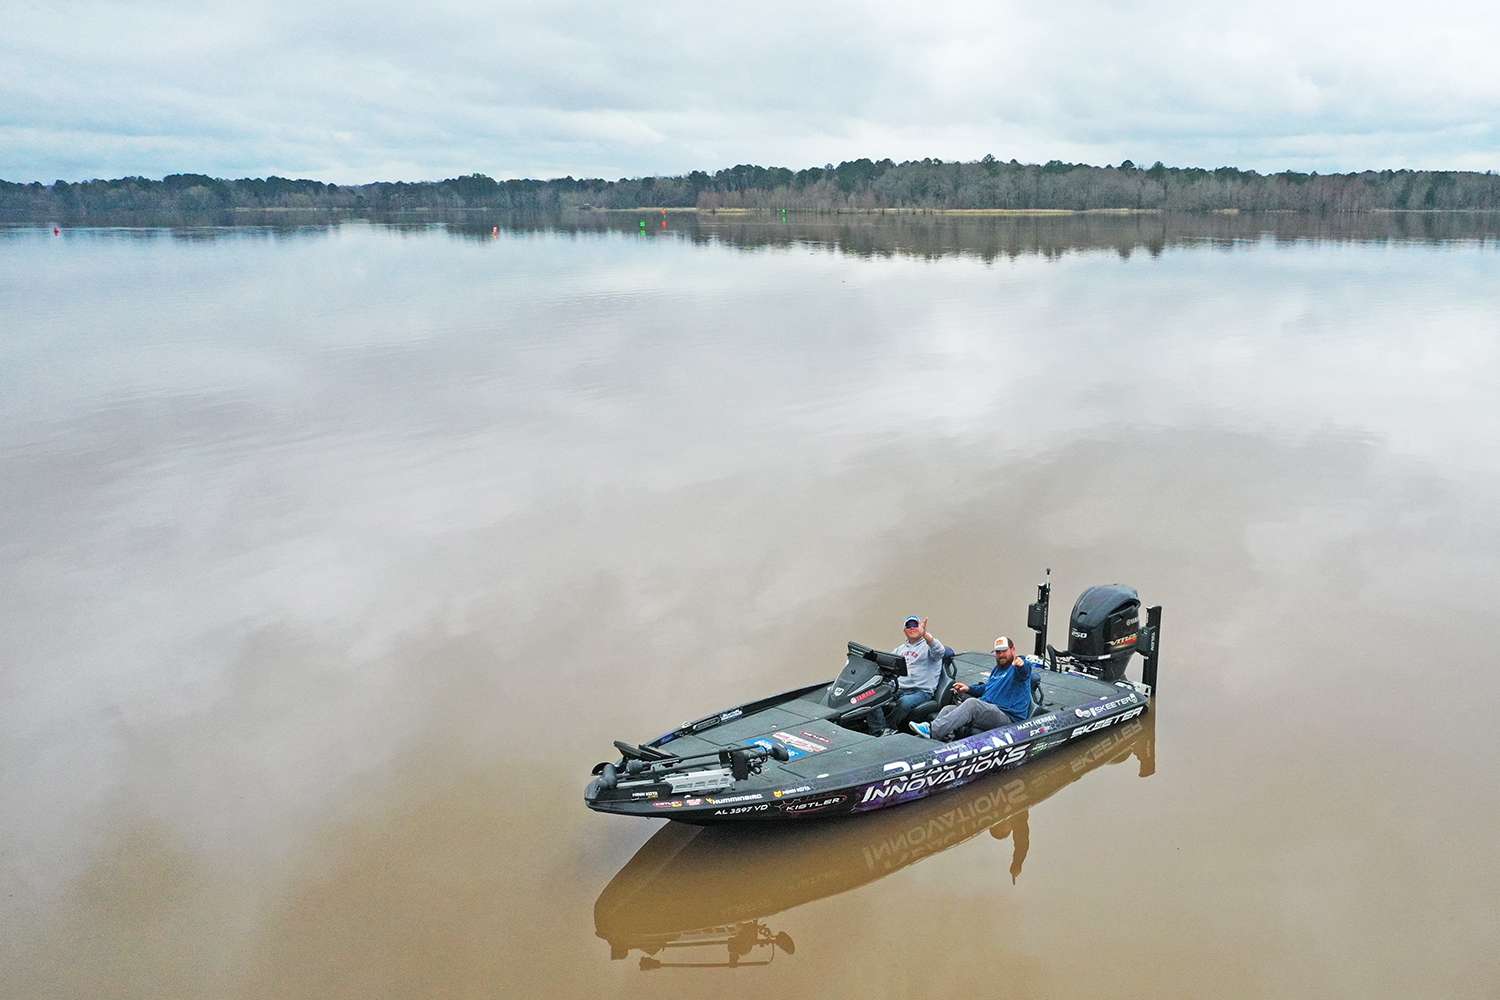 To get the 2020 Bassmaster Elite Series season kicked back off in style, Lake Eufaula, along the Alabama/Georgia border, will serve as the first stop following a two-month break during the coronavirus pandemic. The tournament will be June 10-13. Alabama native Matt Herren has a very long history with the lake, and he acted as our tour guide. 